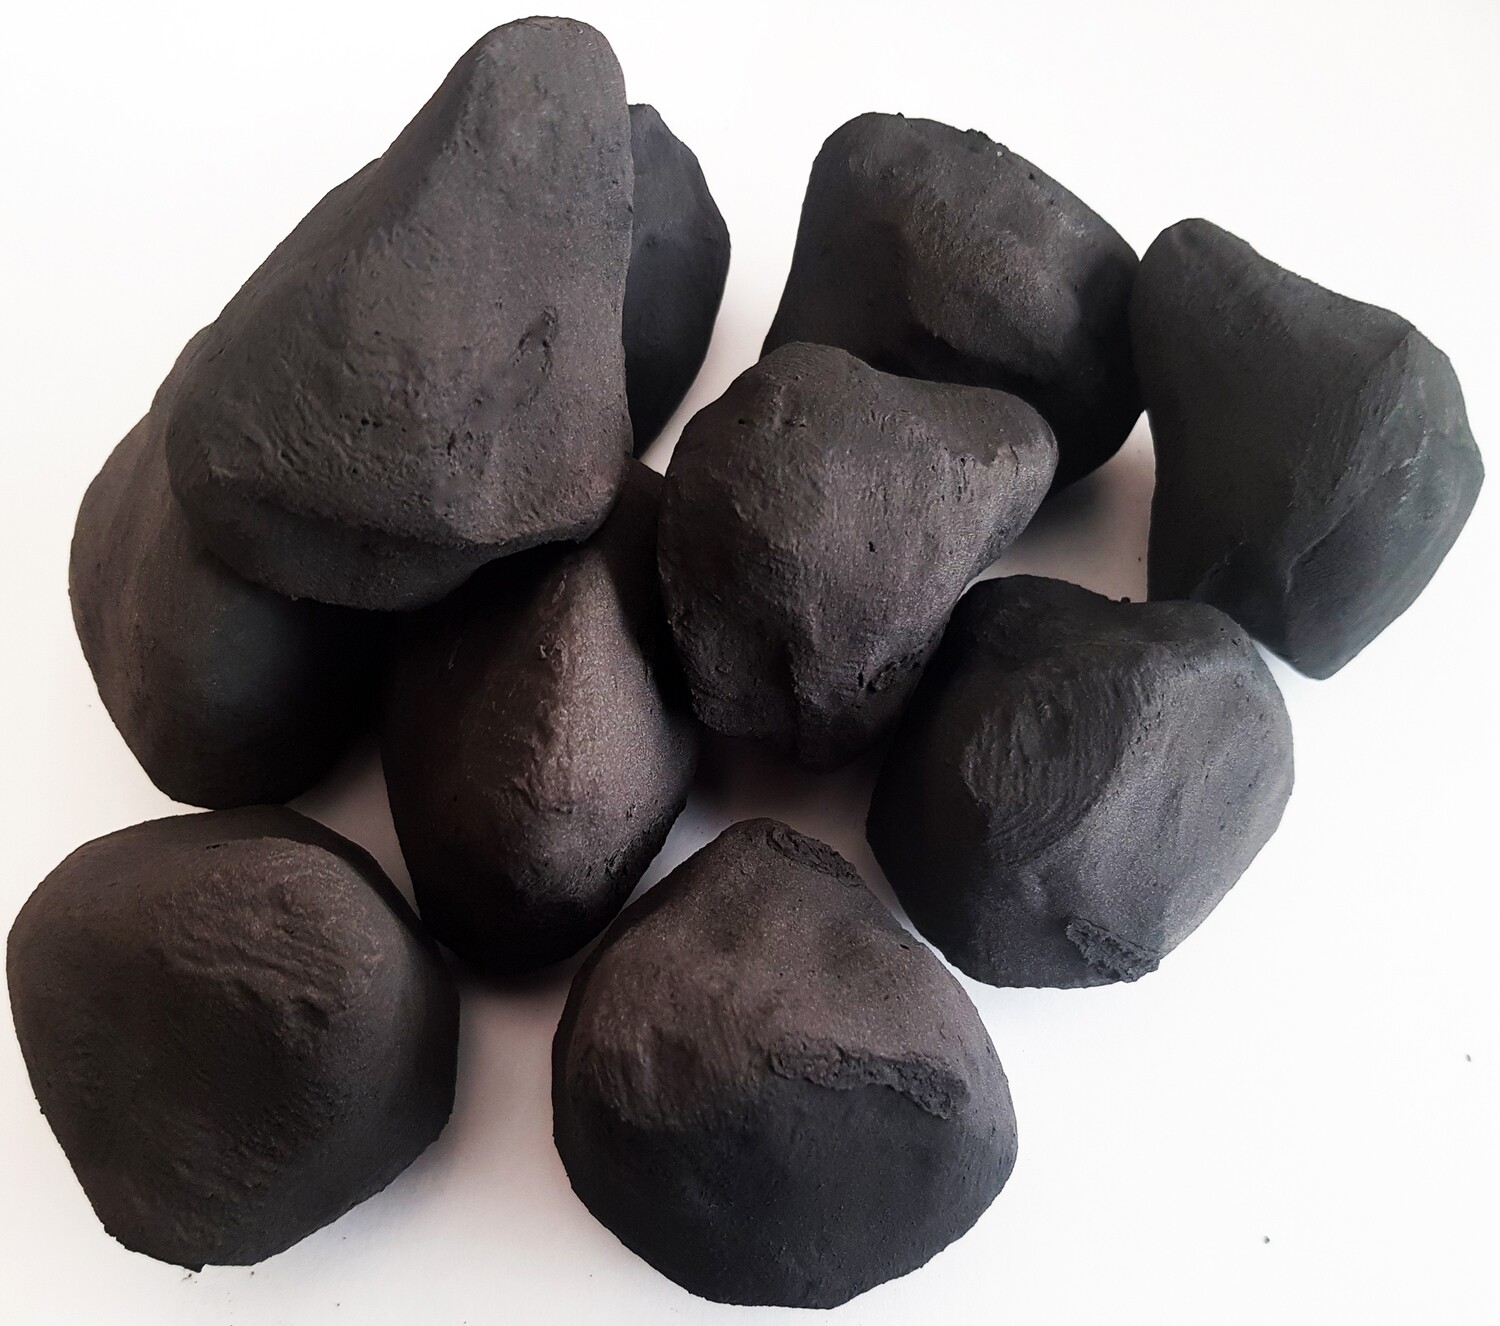 Details about   20 GAS COAL FIRE REPLACEMENT CERAMIC GREY PEBBLES 60MM NEW SELLER OFFER 